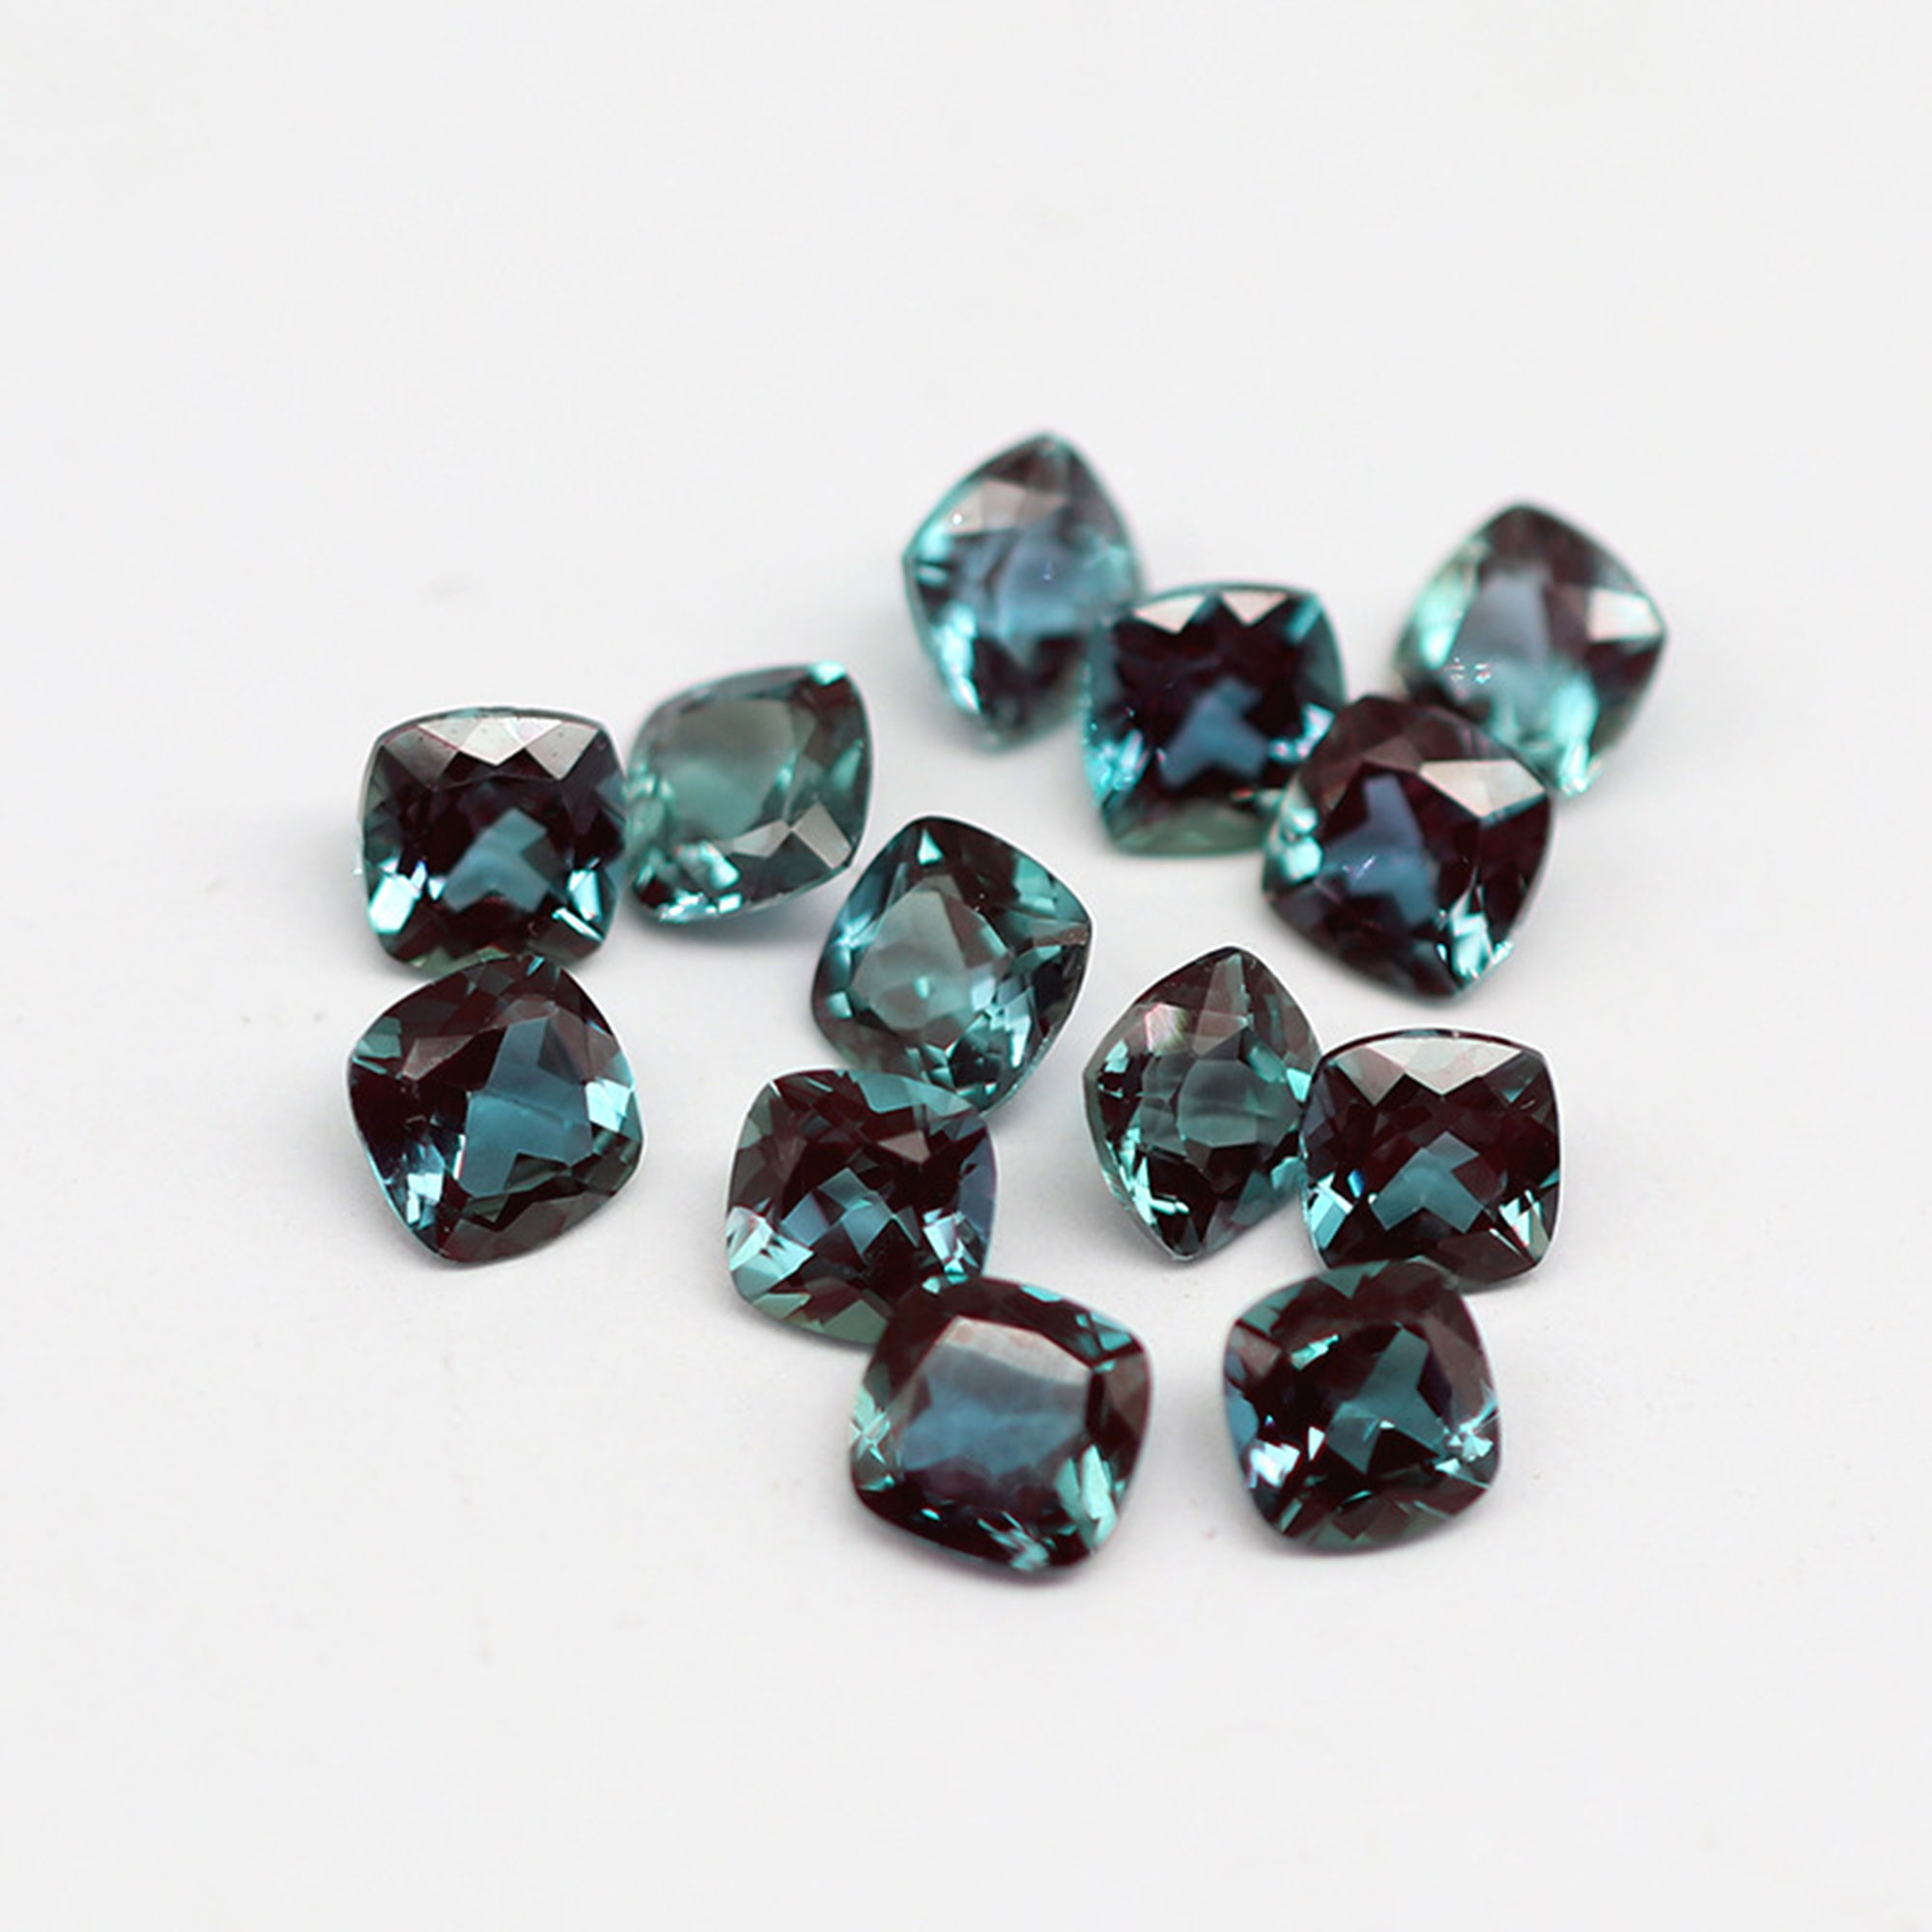 Lab Grown Alexandrite Faceted Gemstone,Cushion Square Color Change Stone,June Birthstone,DIY Loose Gemstone Supplies 4140028 - Click Image to Close